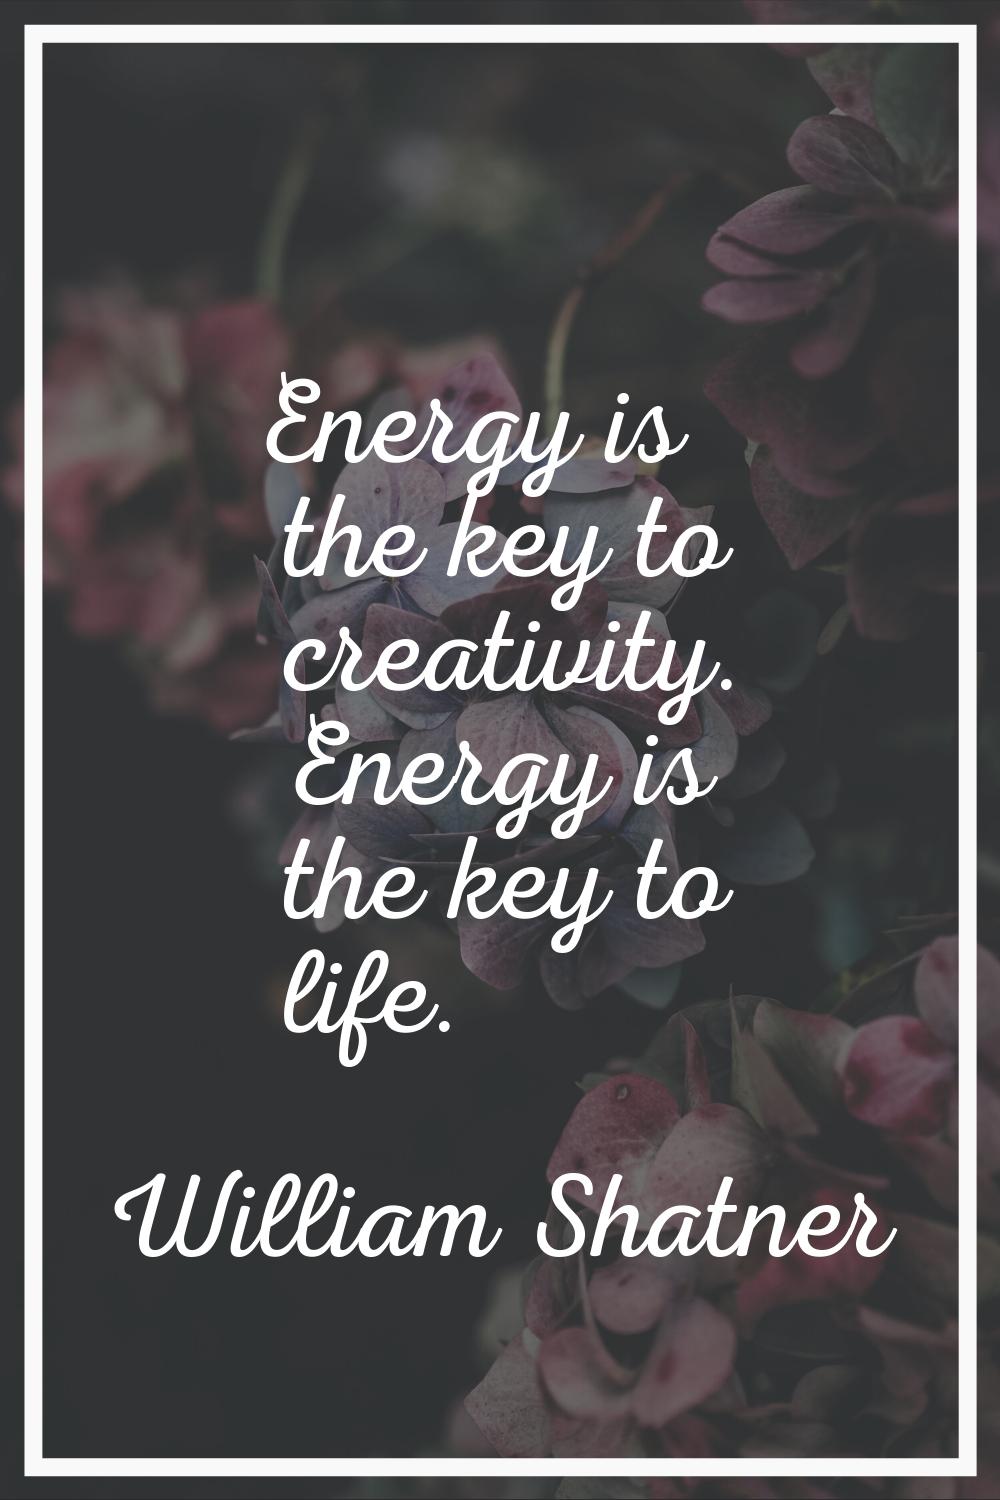 Energy is the key to creativity. Energy is the key to life.